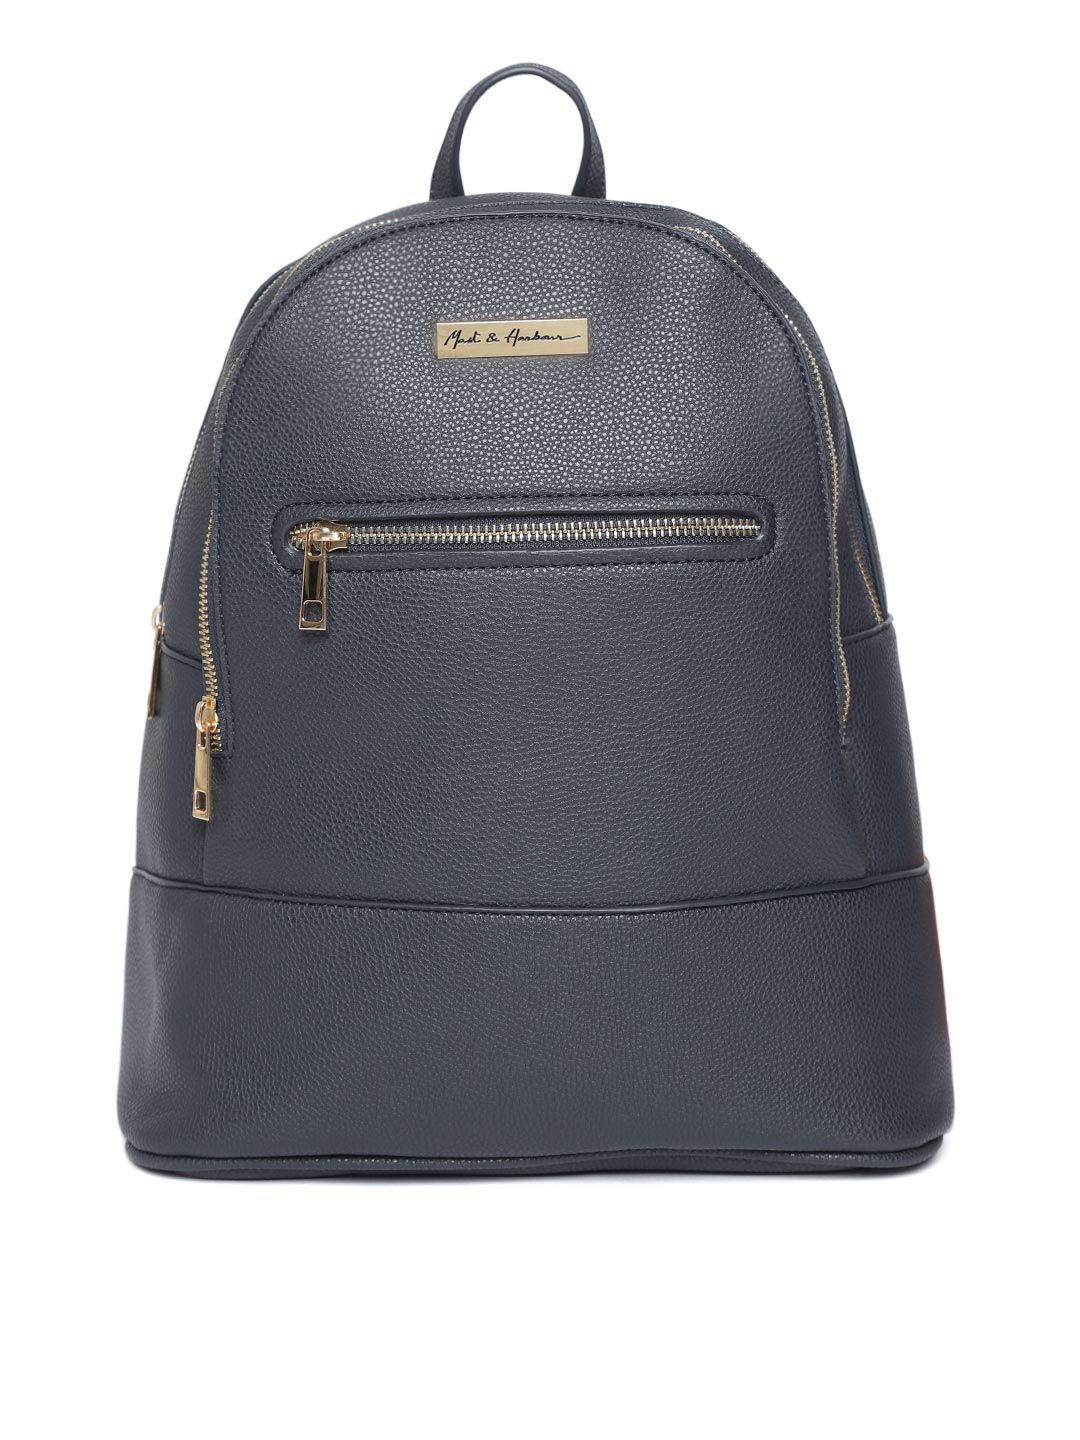 Mast & Harbour Women Navy Blue Solid Backpack Price in India